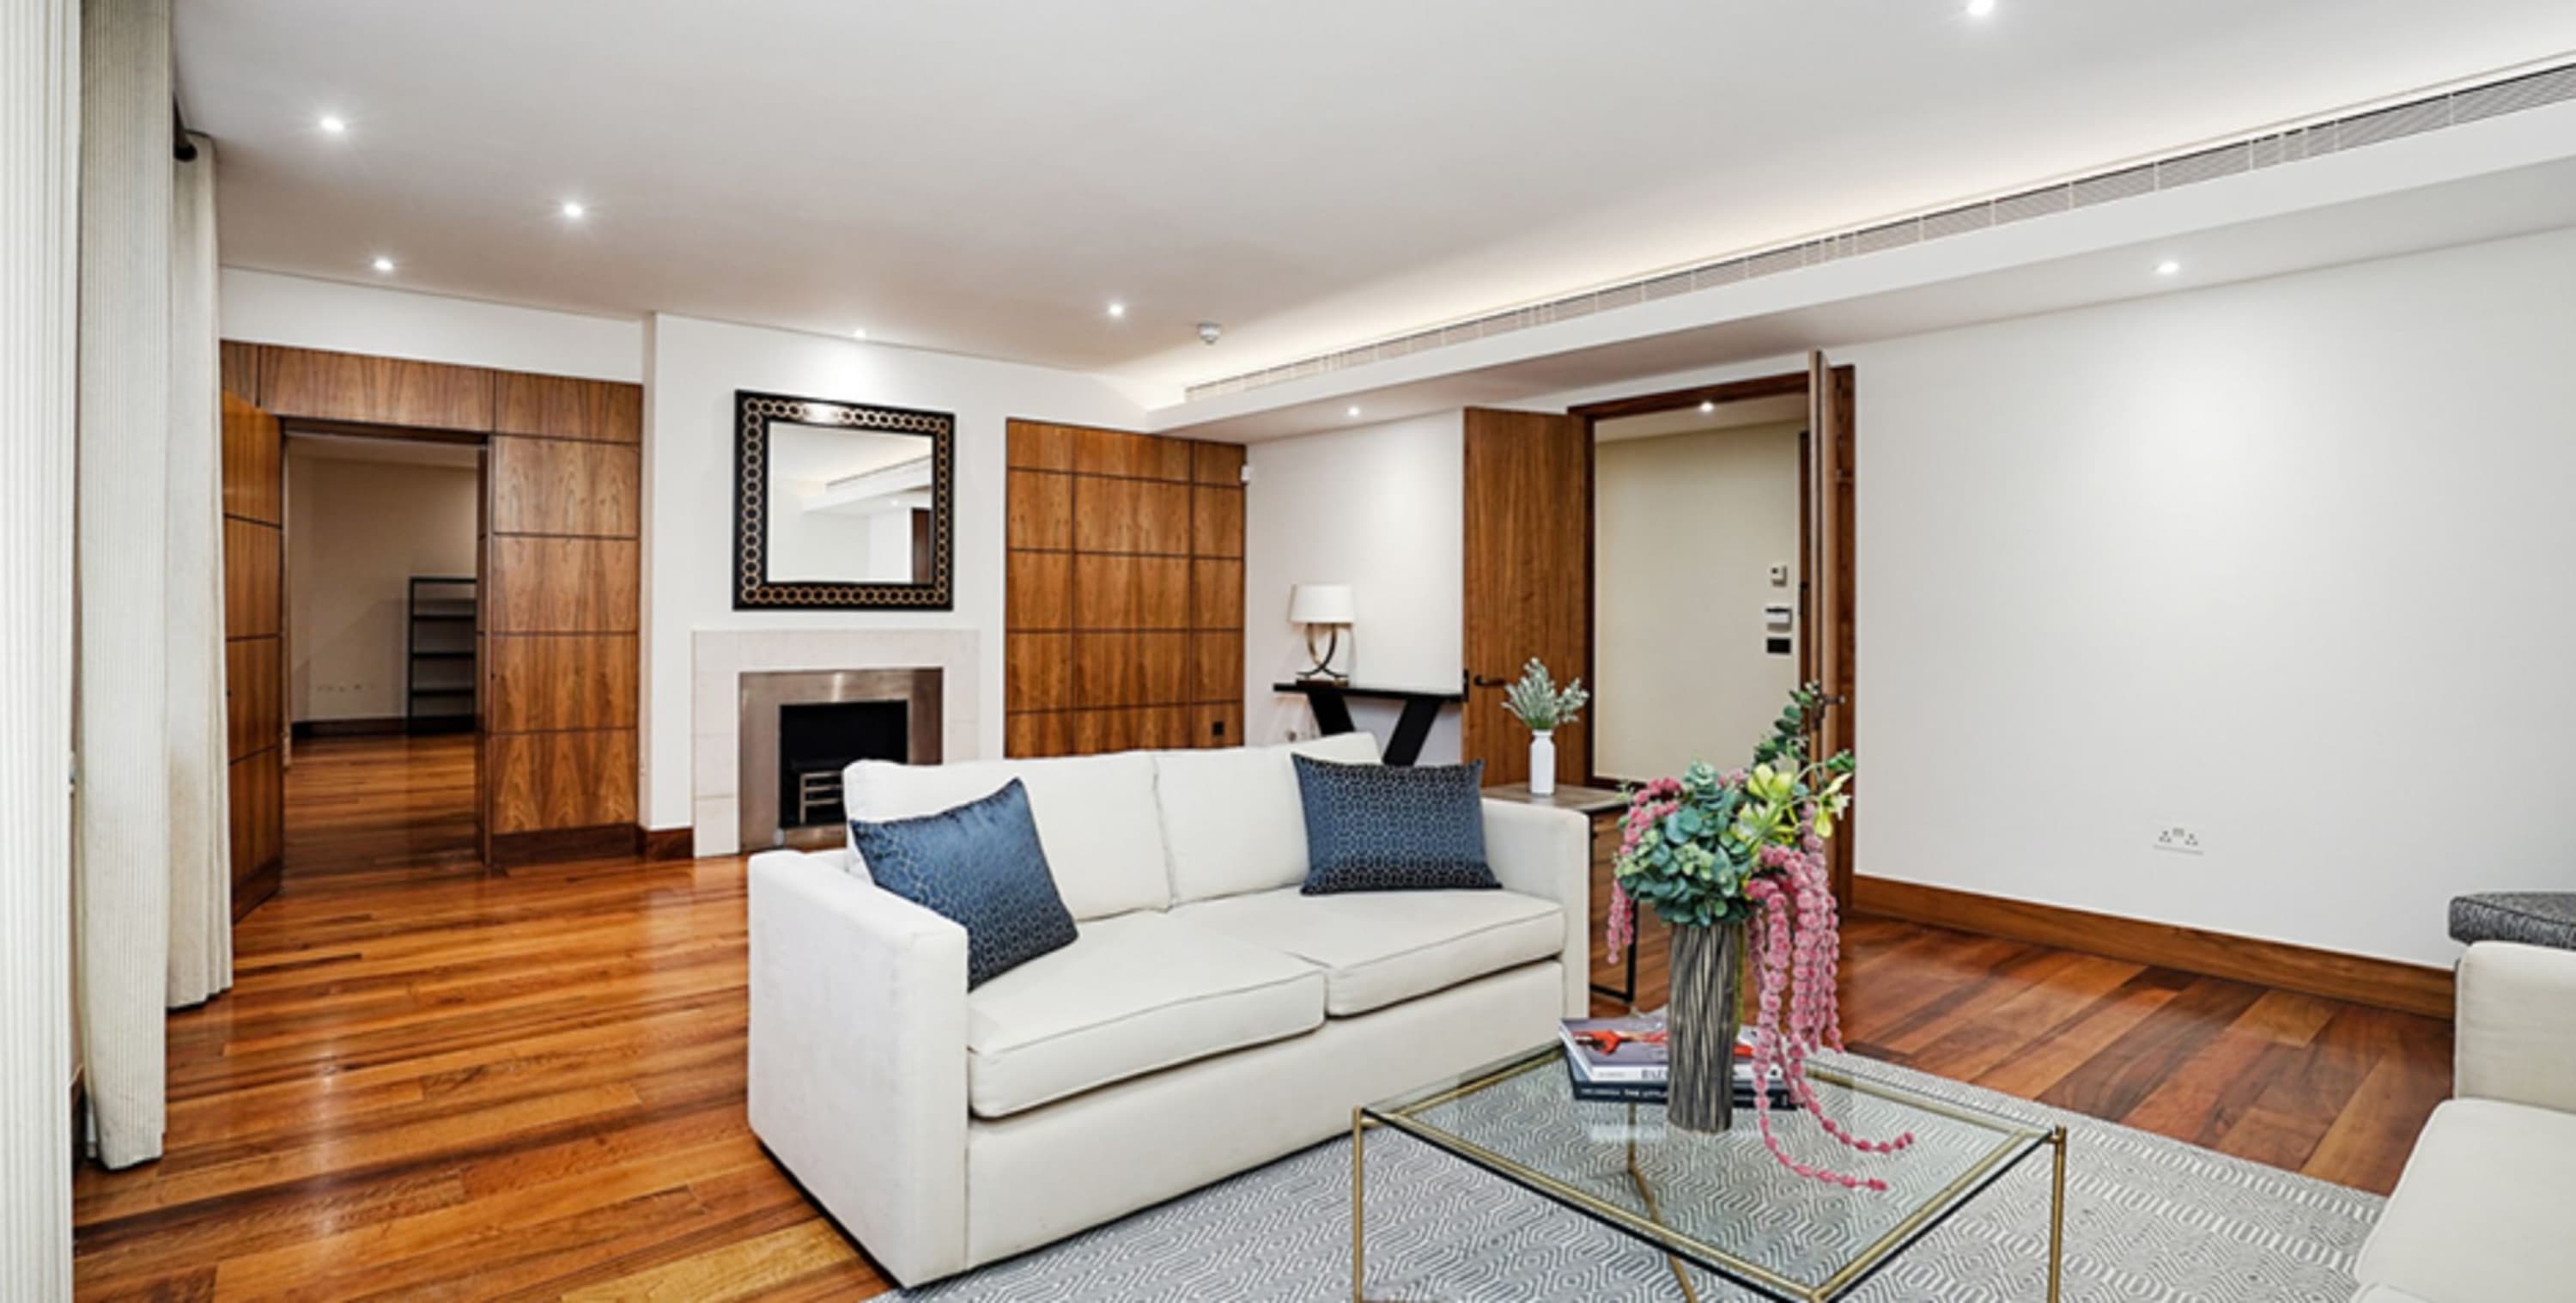 Property Image 2 - Nice Comfy Flat in Exclusive Mayfair near Oxford Street